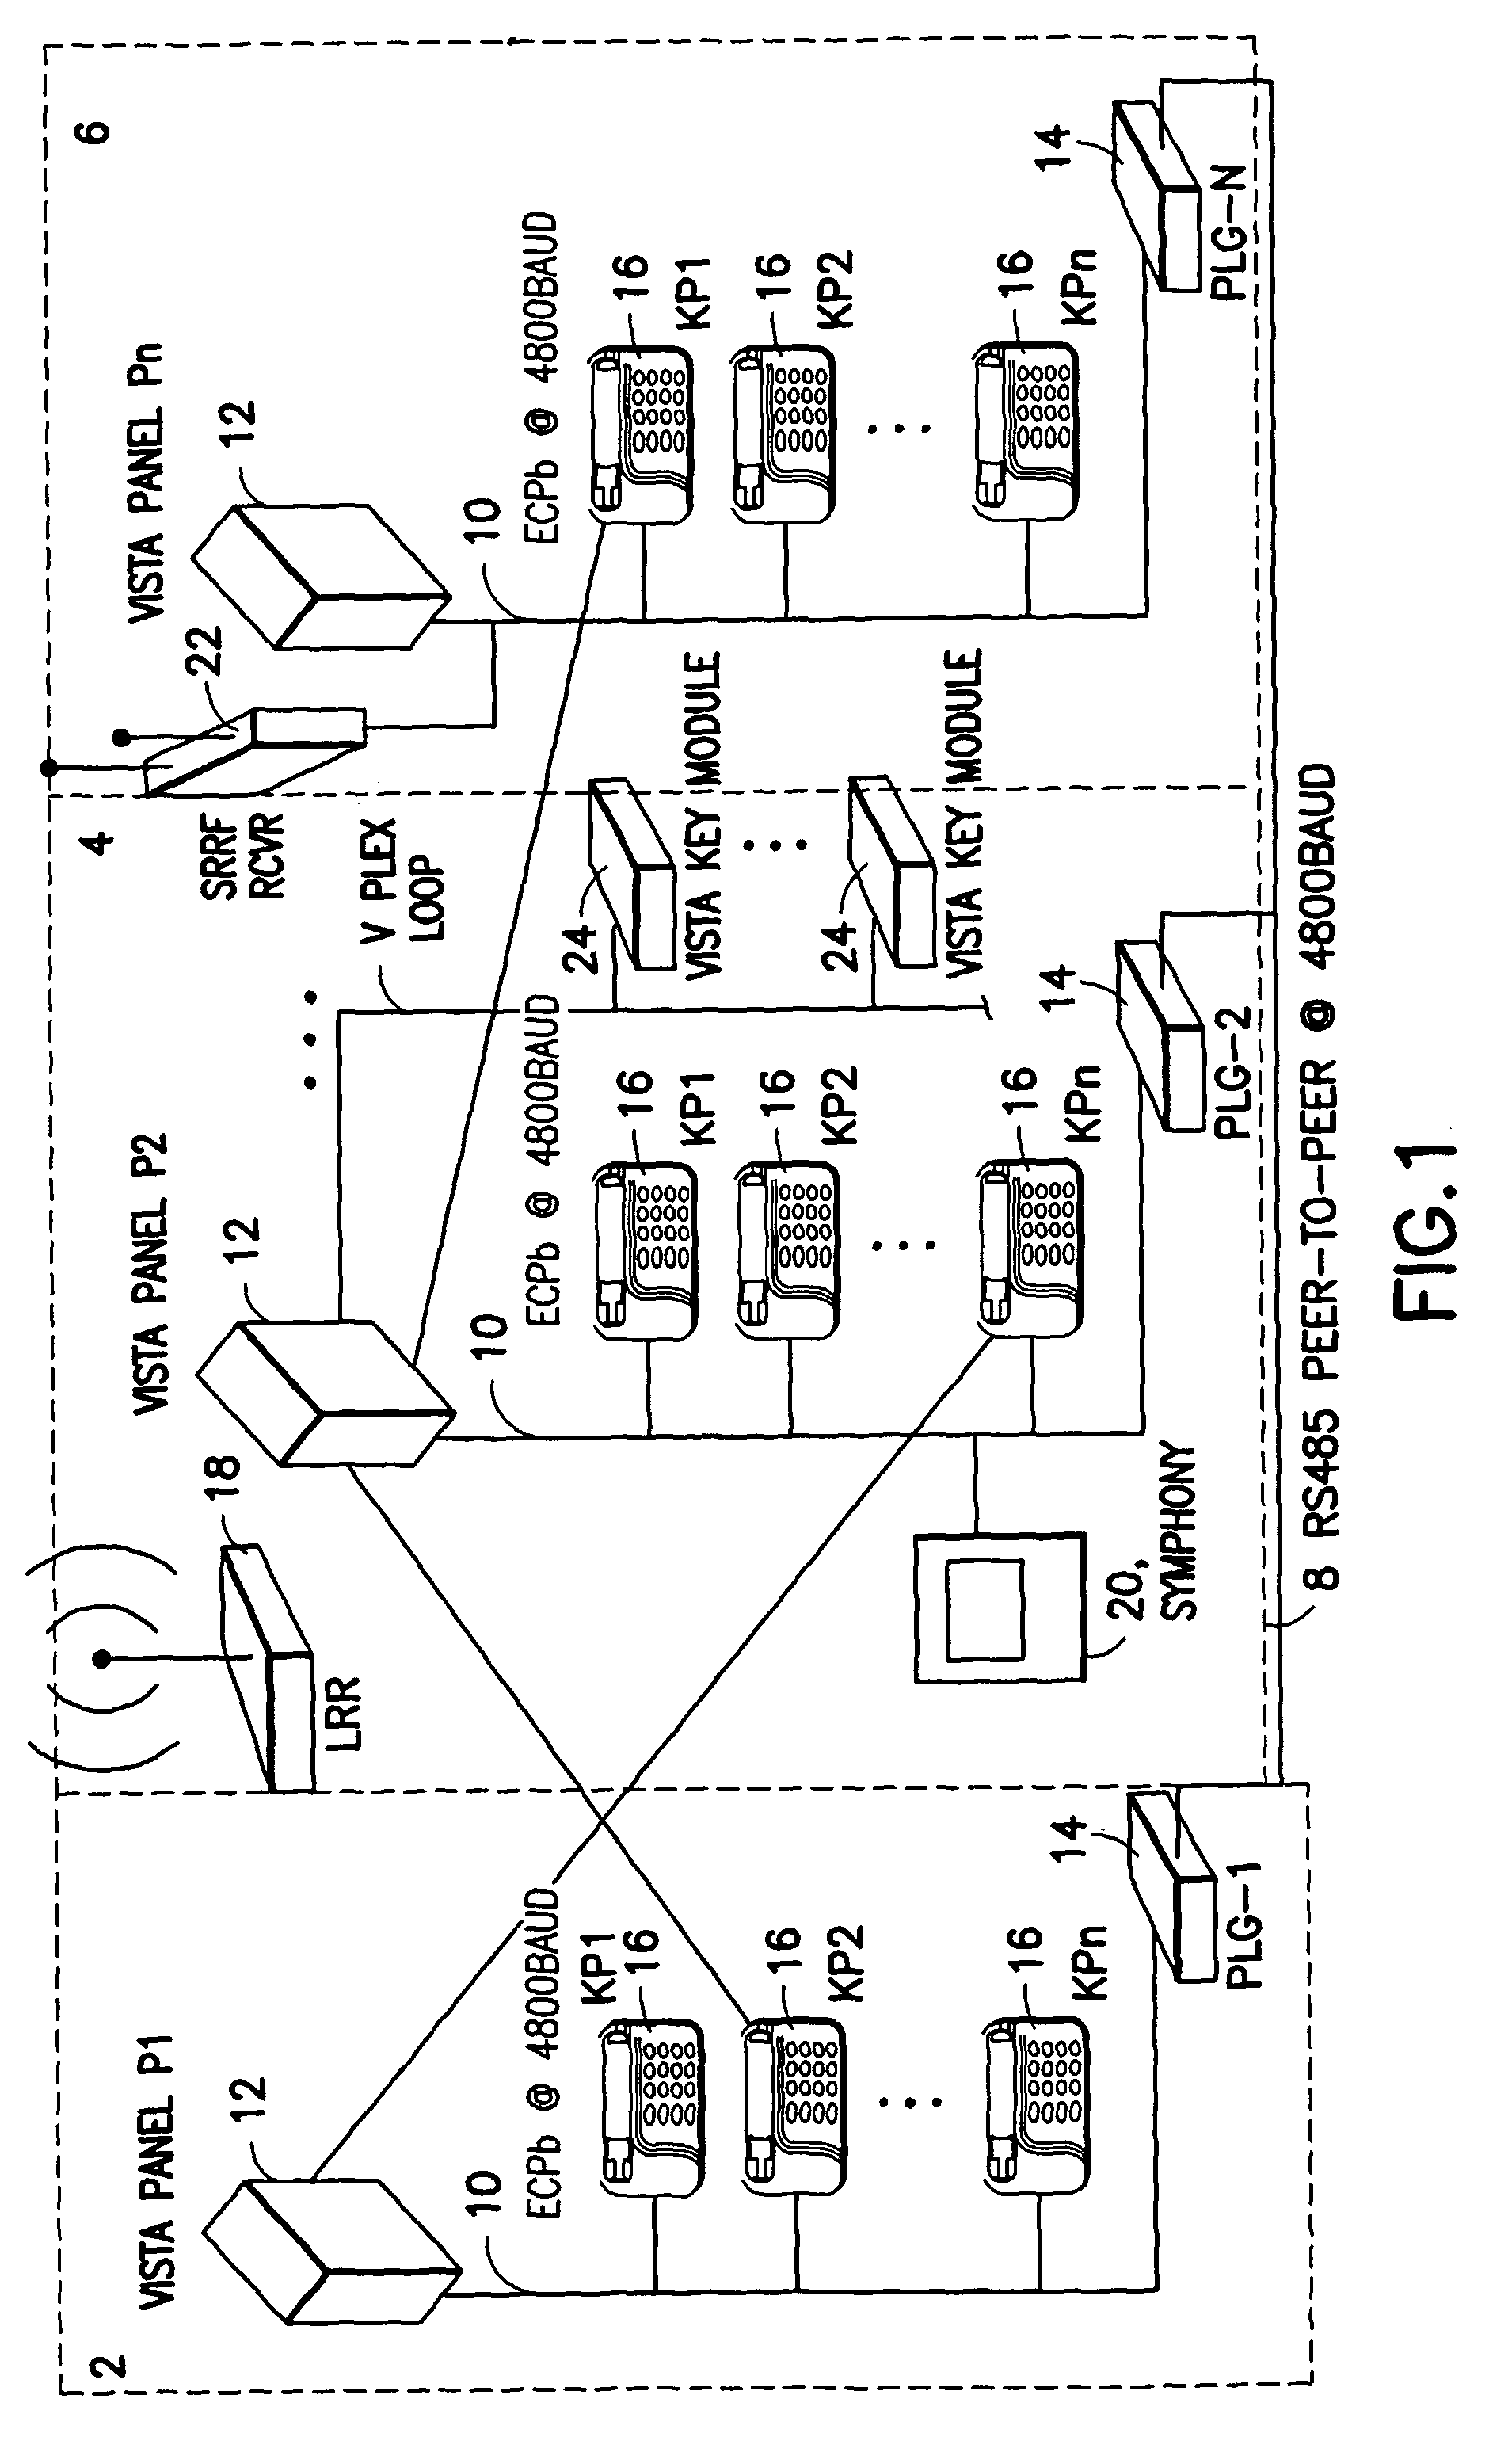 System and method for panel linking in a security system